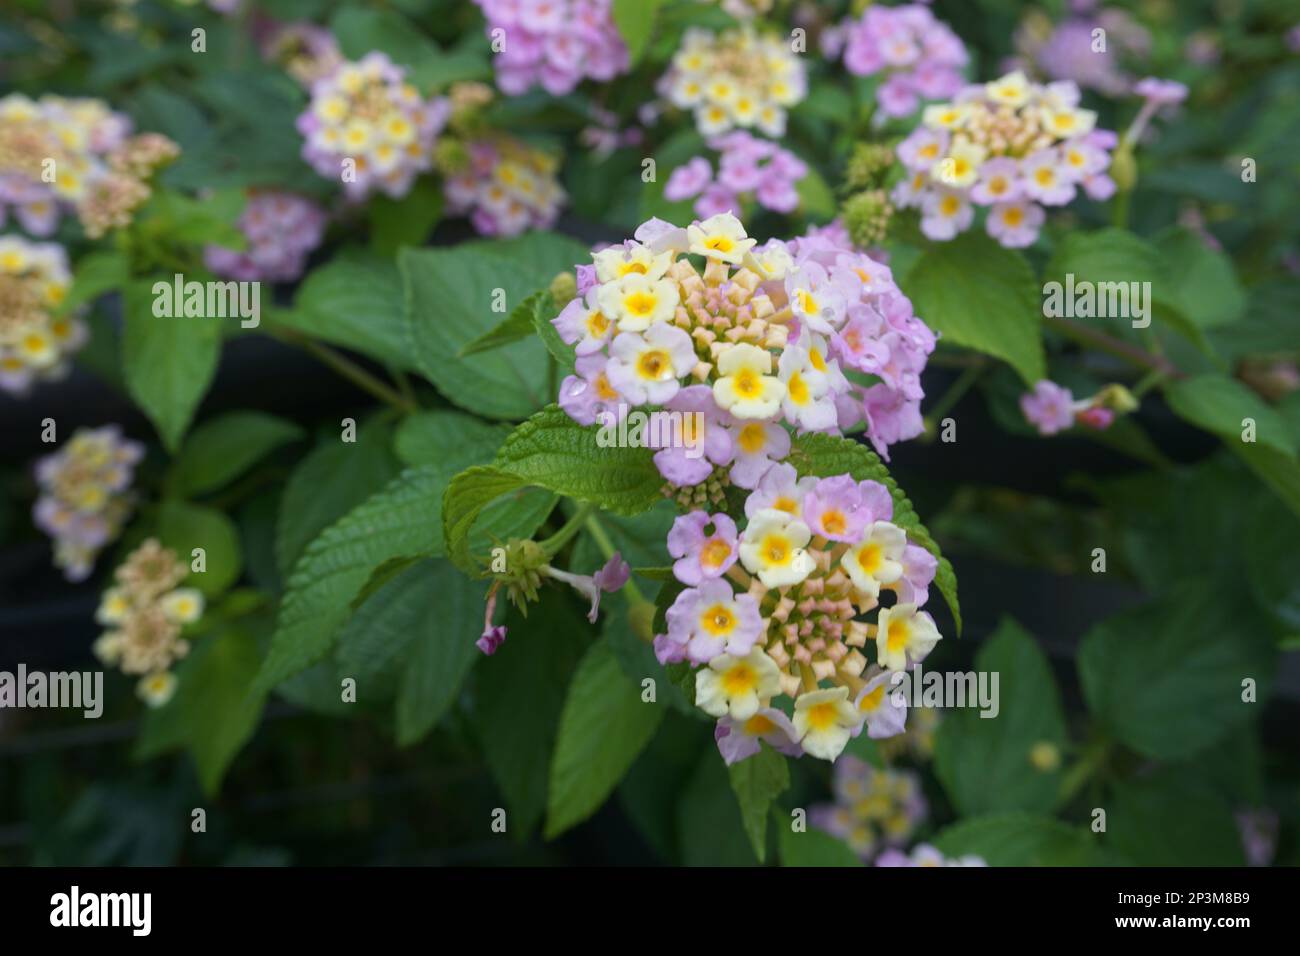 Lantana montevidensis is a small strongly scented flowering low shrub with oval shaped green leaves. With support it has a climbing vine form, when on Stock Photo